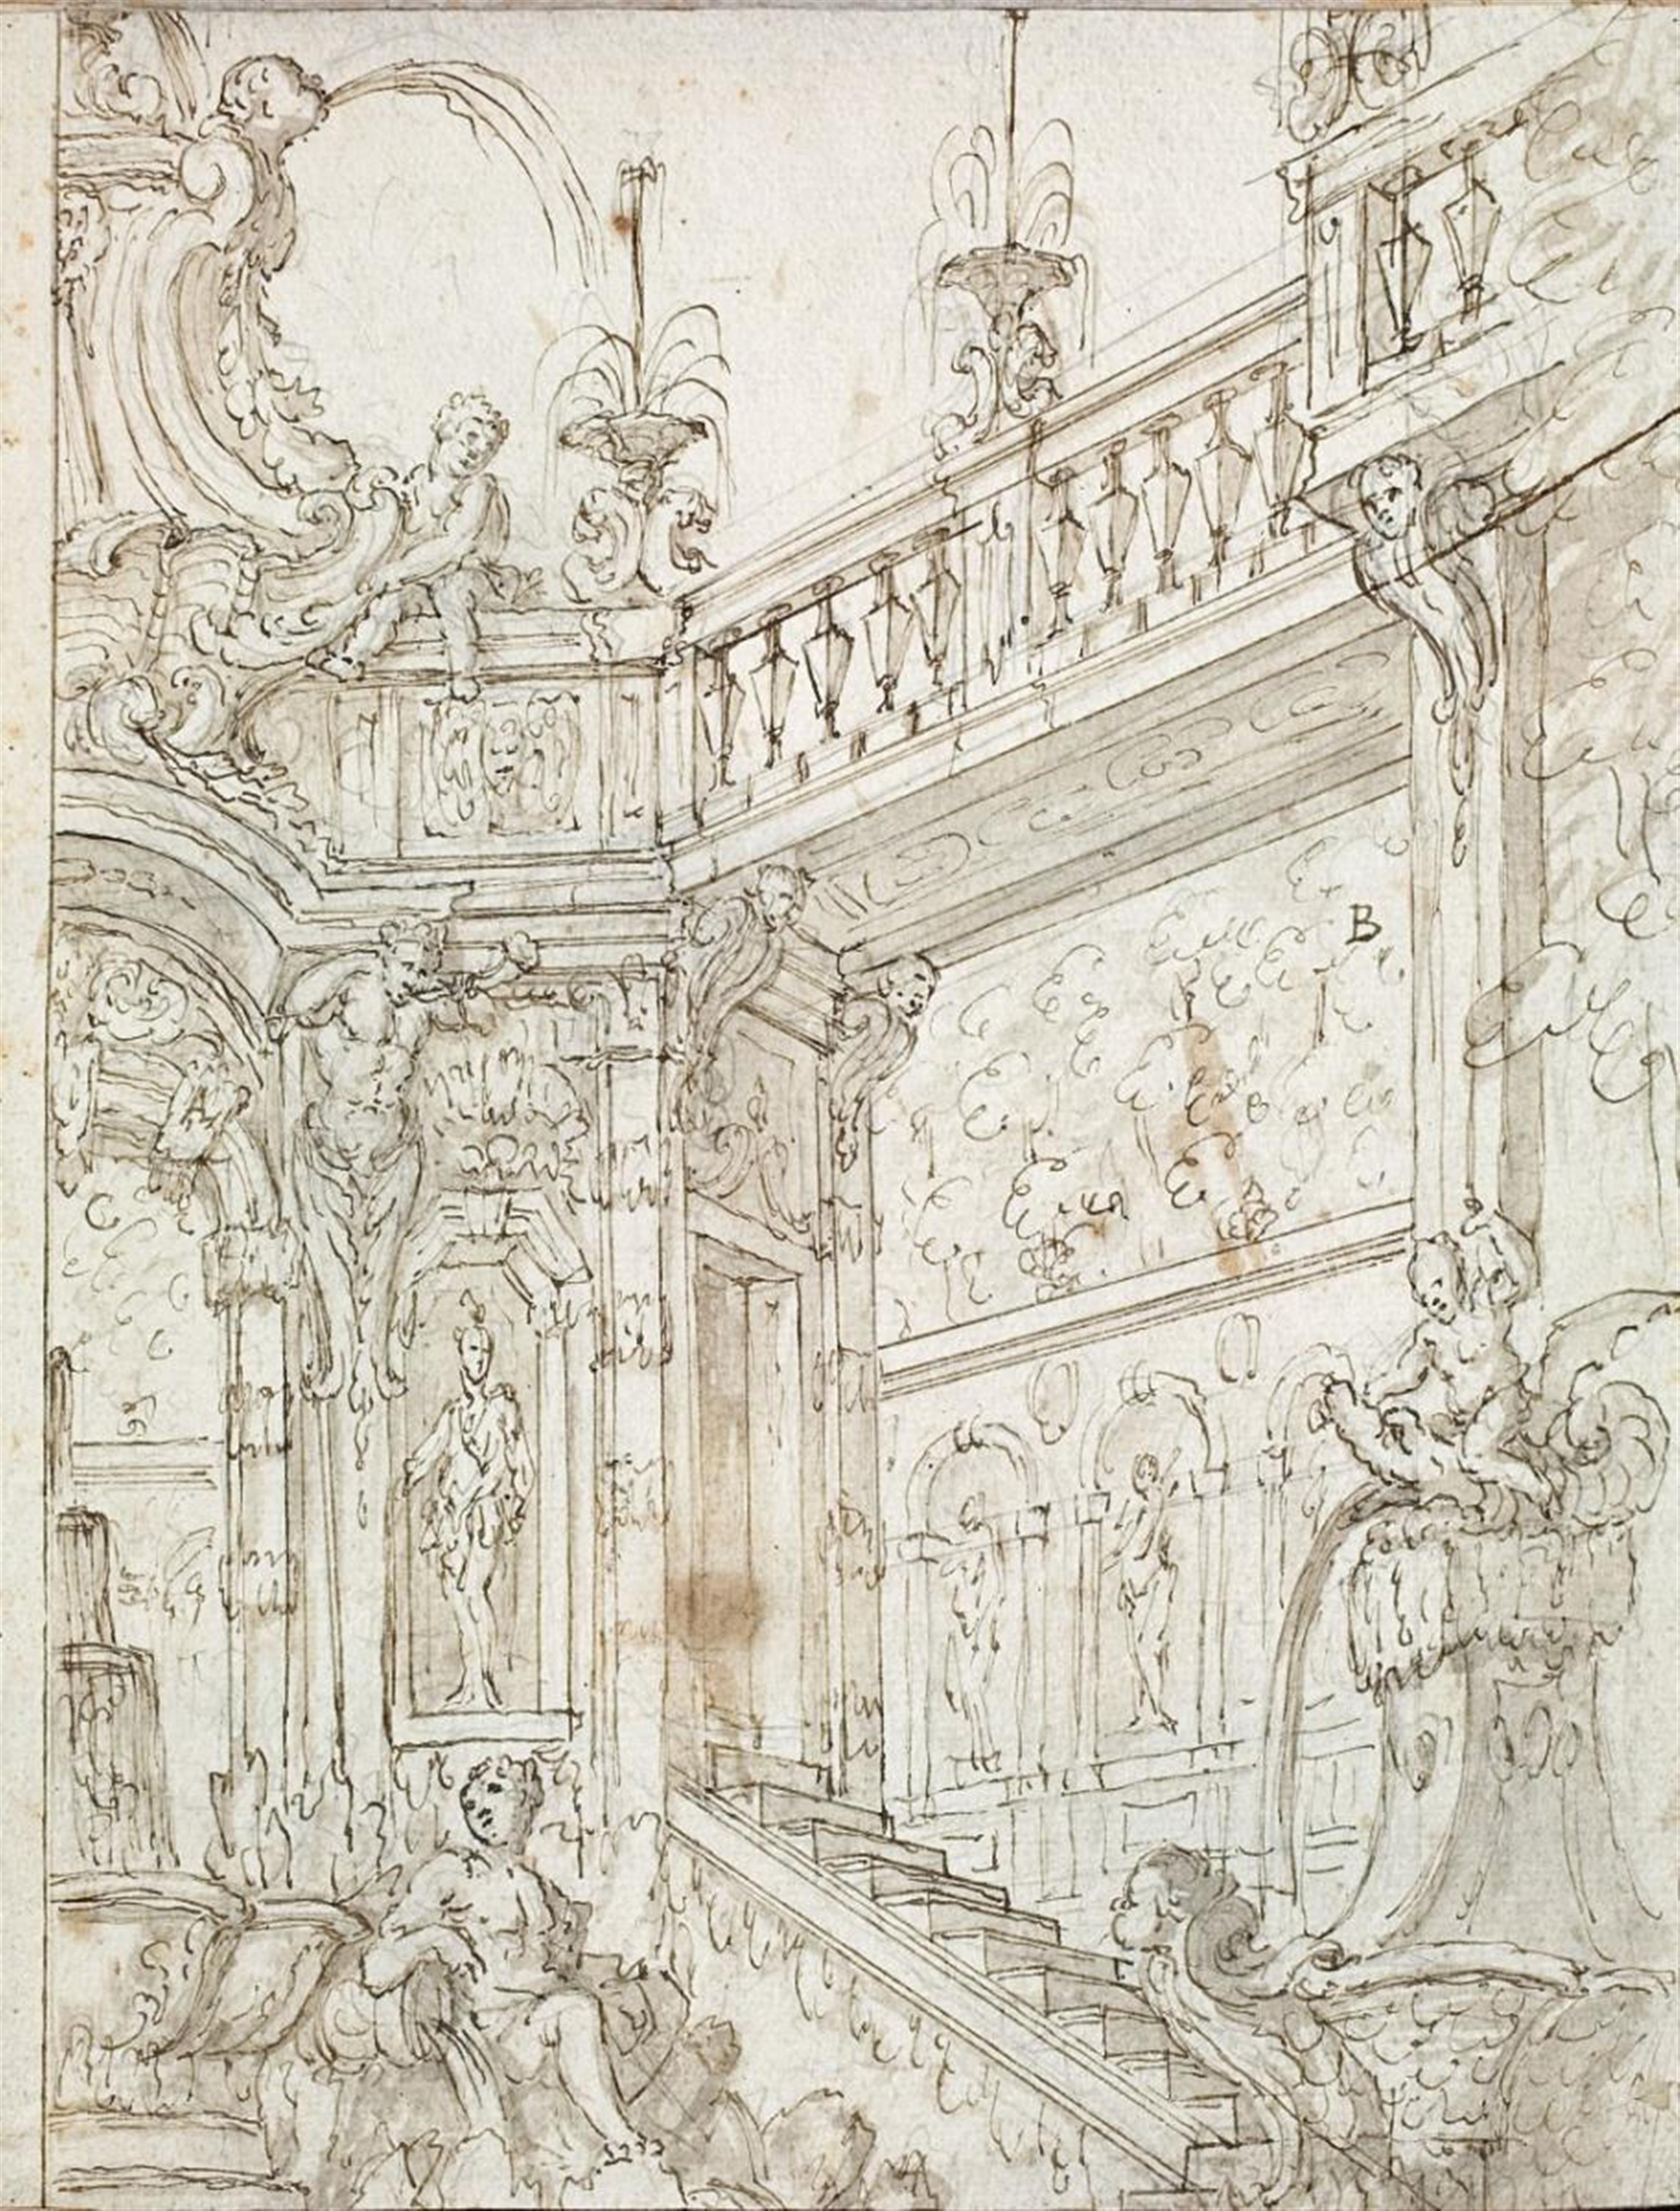 Giuseppe Galli Bibiena, attributed to - VIEW OF STAIRS IN A CASTLE - image-1